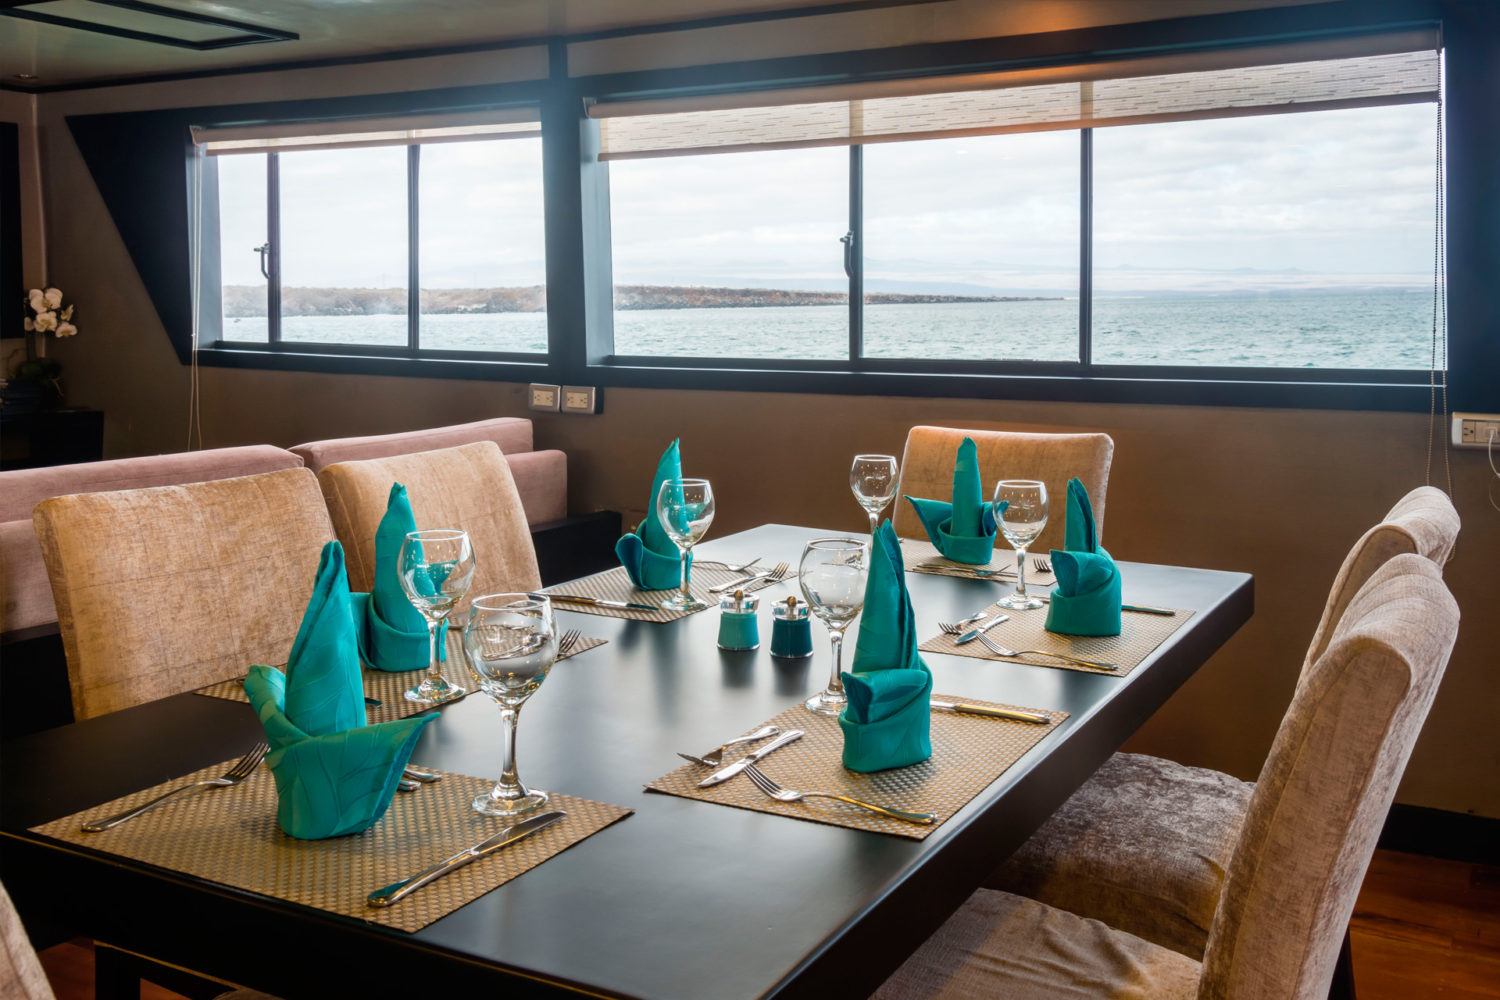 M/Y Sea Star Journey Galapagos Cruise - Dinning Room